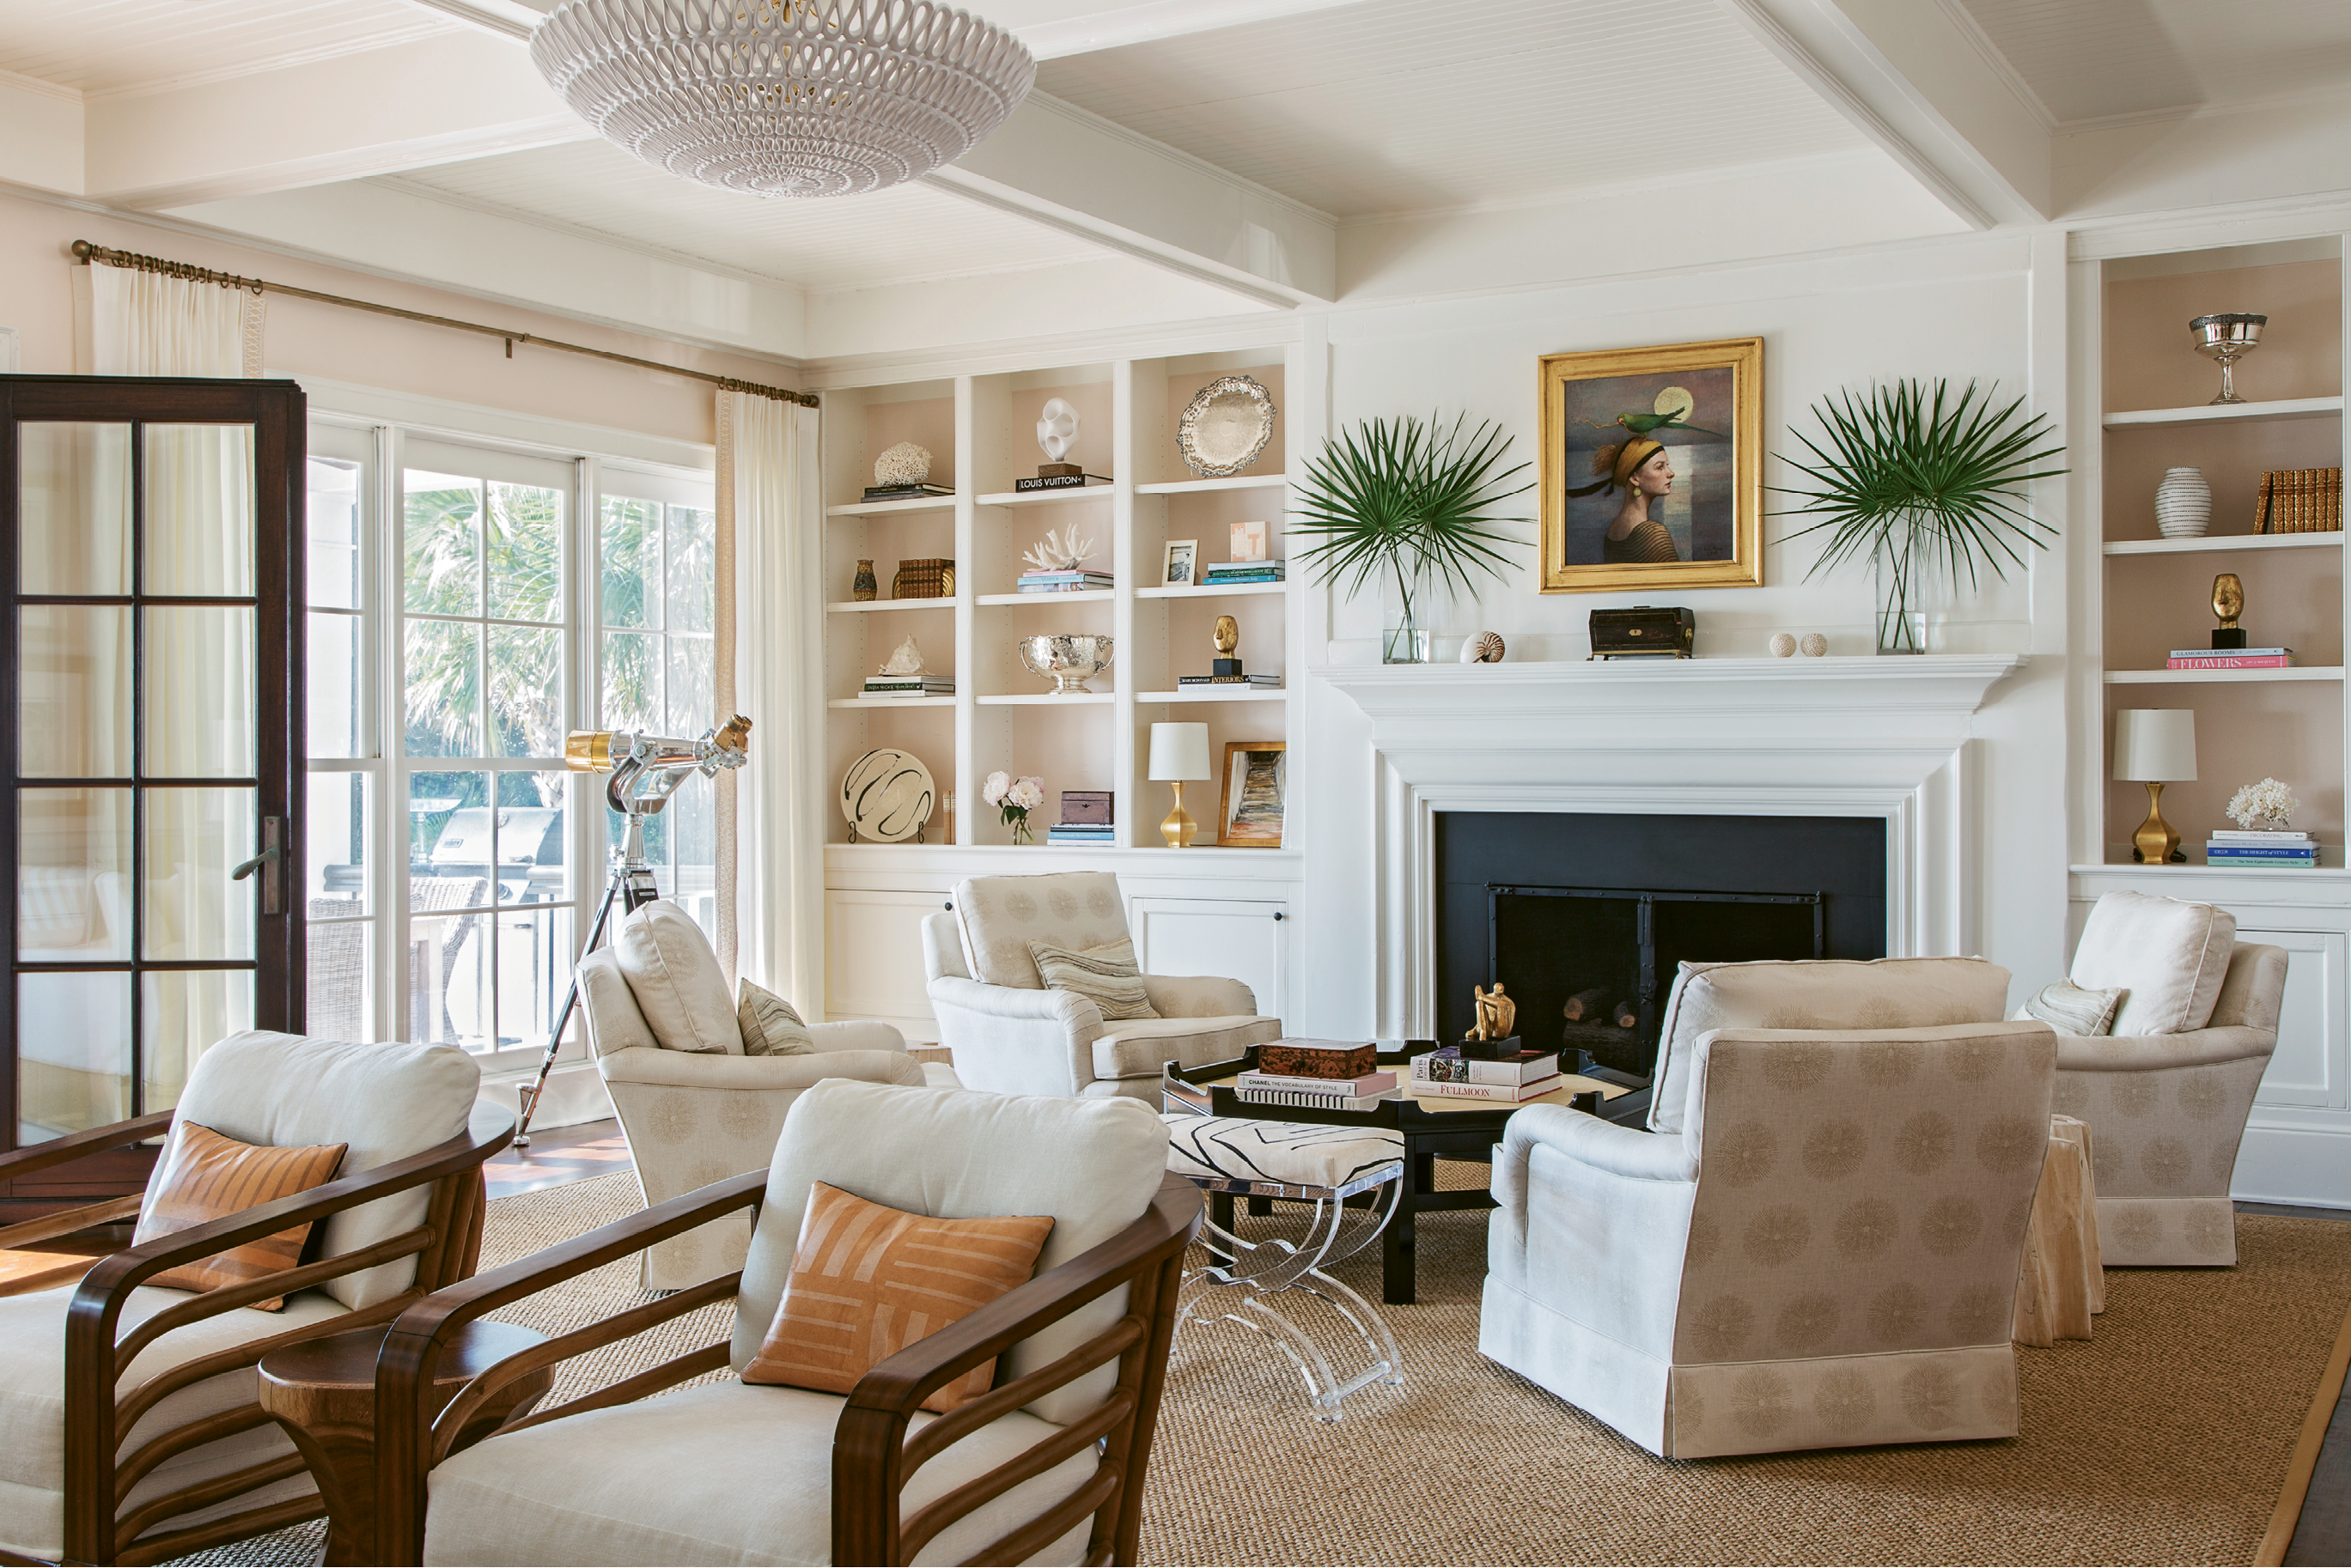 COASTAL CHARM: The Kings asked designer Allison Elebash to infuse the home with a laid-back island vibe. For the living room, she chose a color palette inspired by coastal landscapes—the walls, for example, are Benjamin Moore’s “Beautiful in My Eyes,” a rosy hue inspired by the pink sand beaches of the Caribbean.